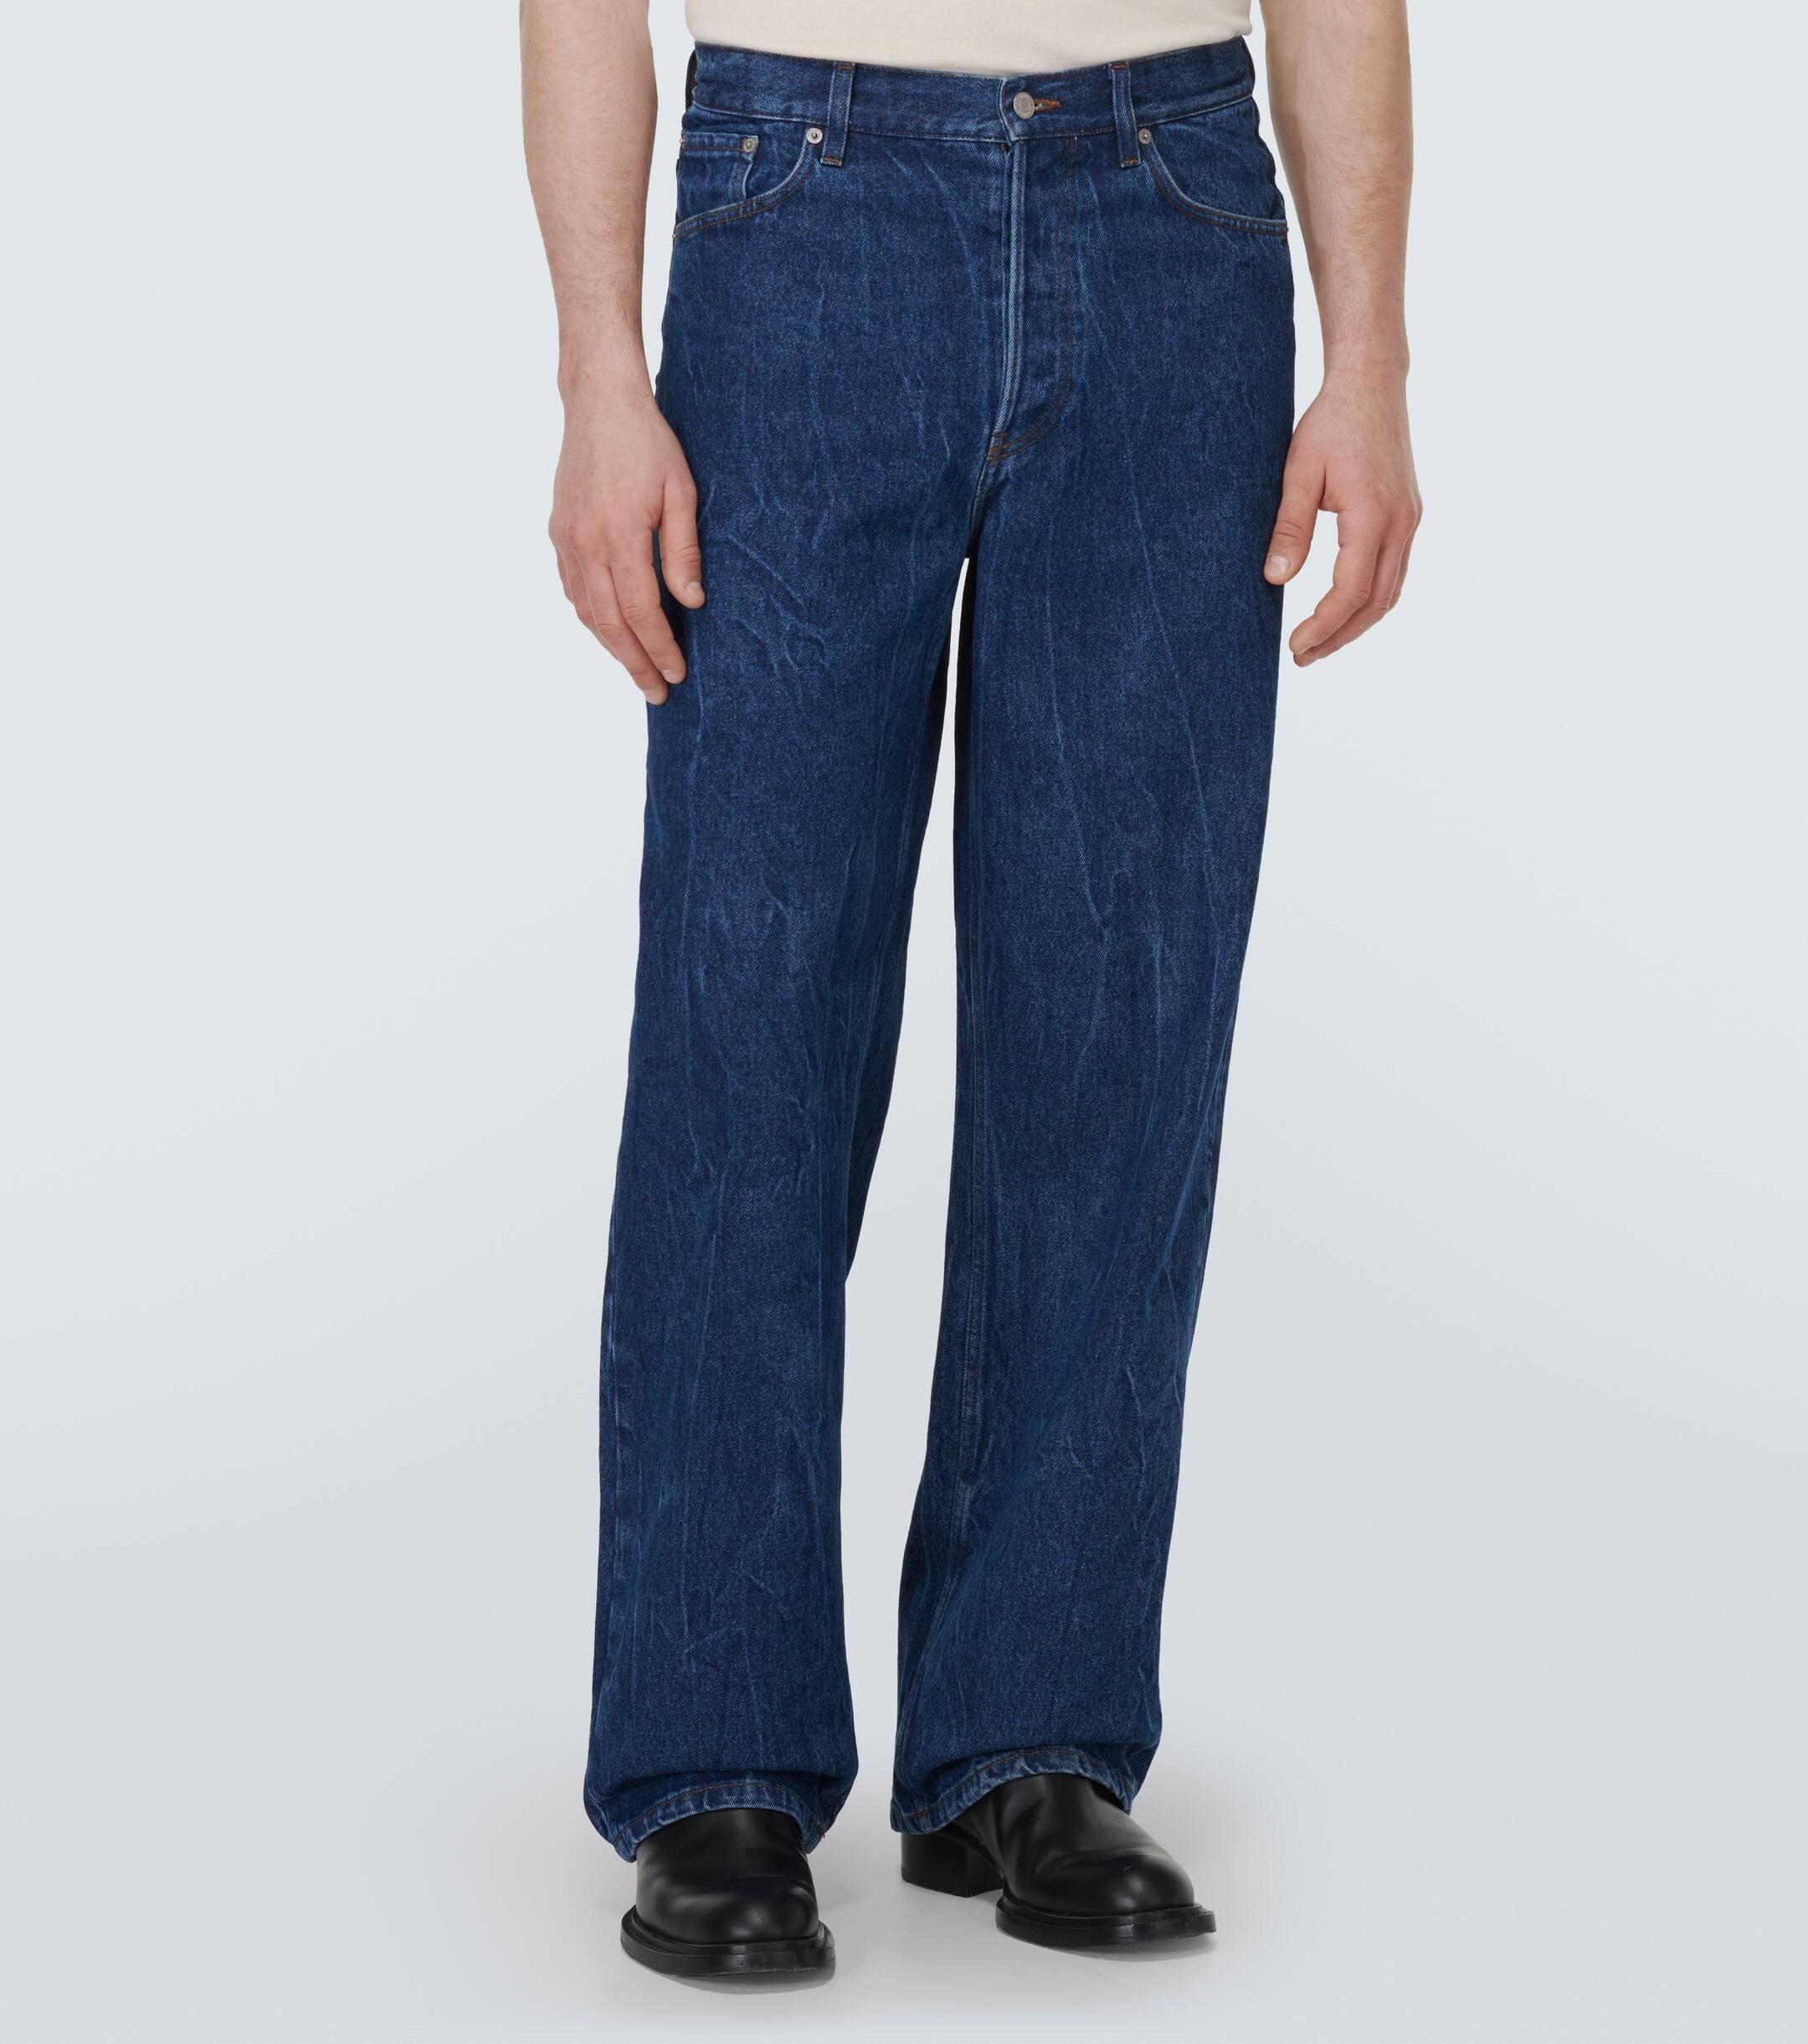 Edwin Jeans Tyrell Denim Pant - Blue Light Marble Wash - Clothing from Fat  Buddha Store UK